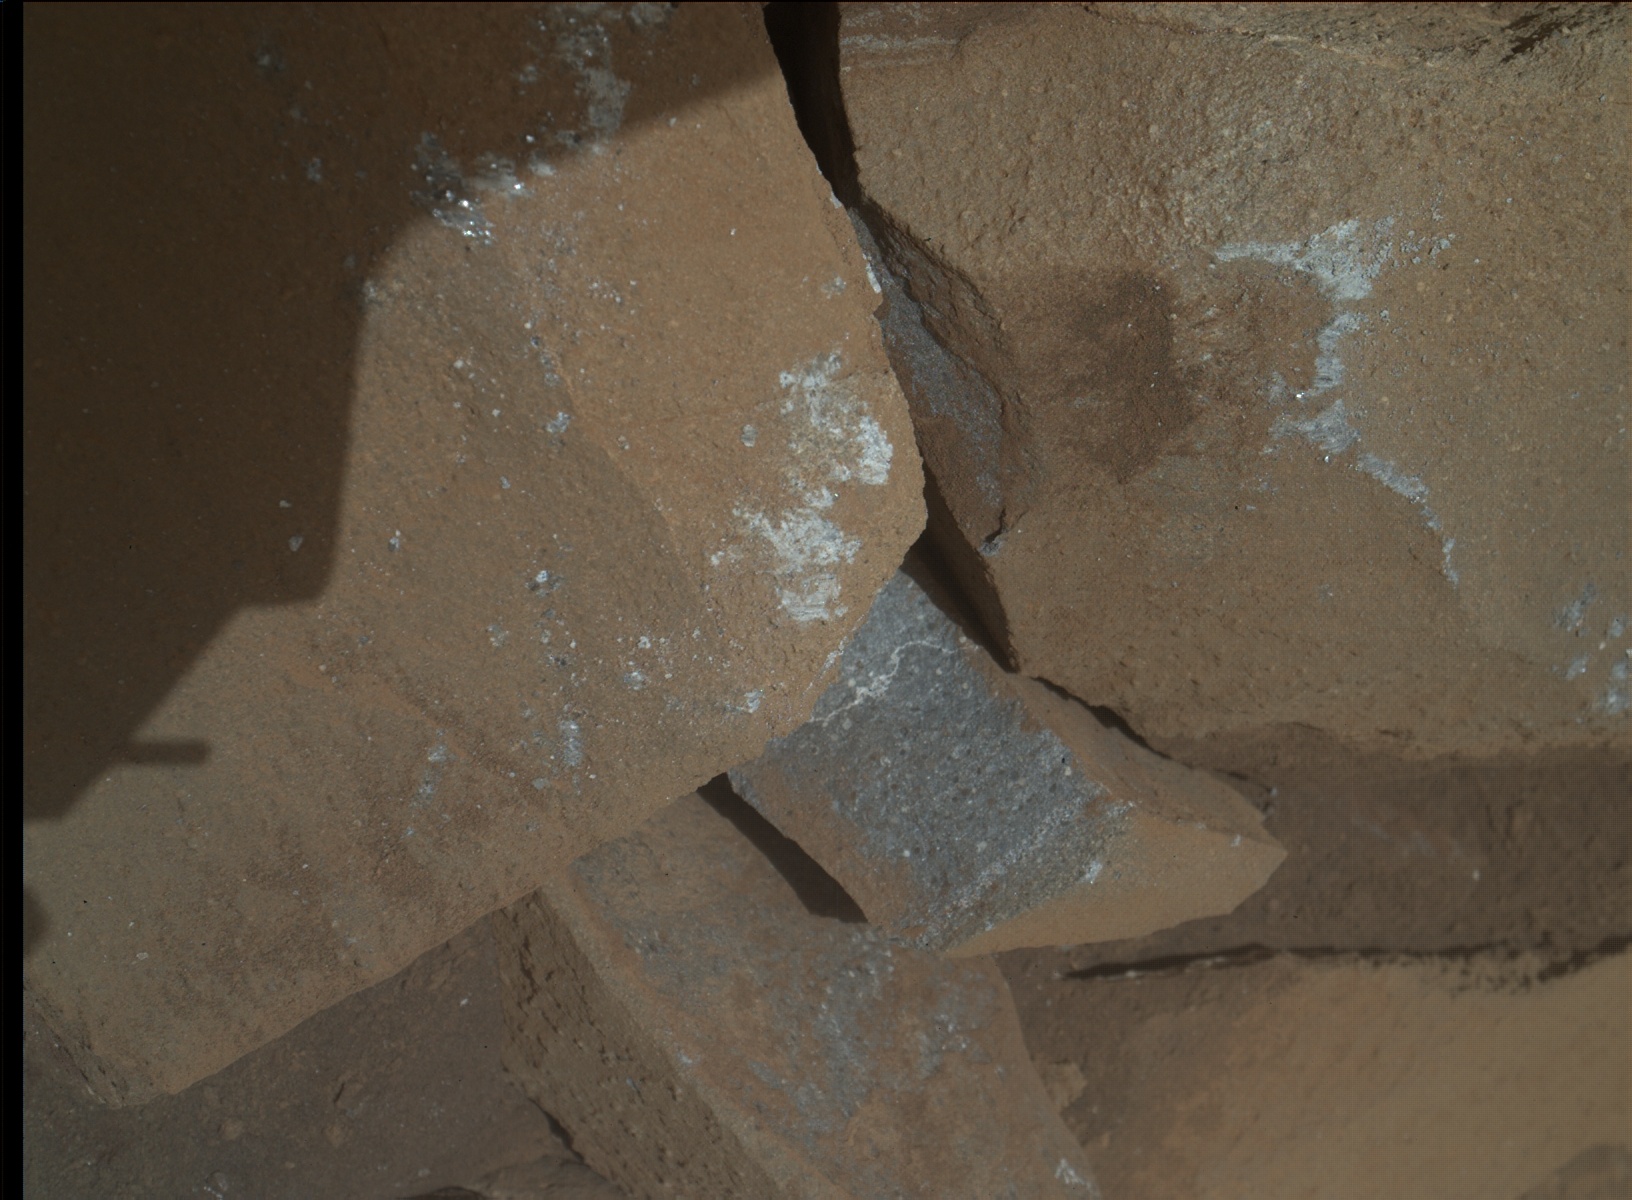 Nasa's Mars rover Curiosity acquired this image using its Mars Hand Lens Imager (MAHLI) on Sol 1344